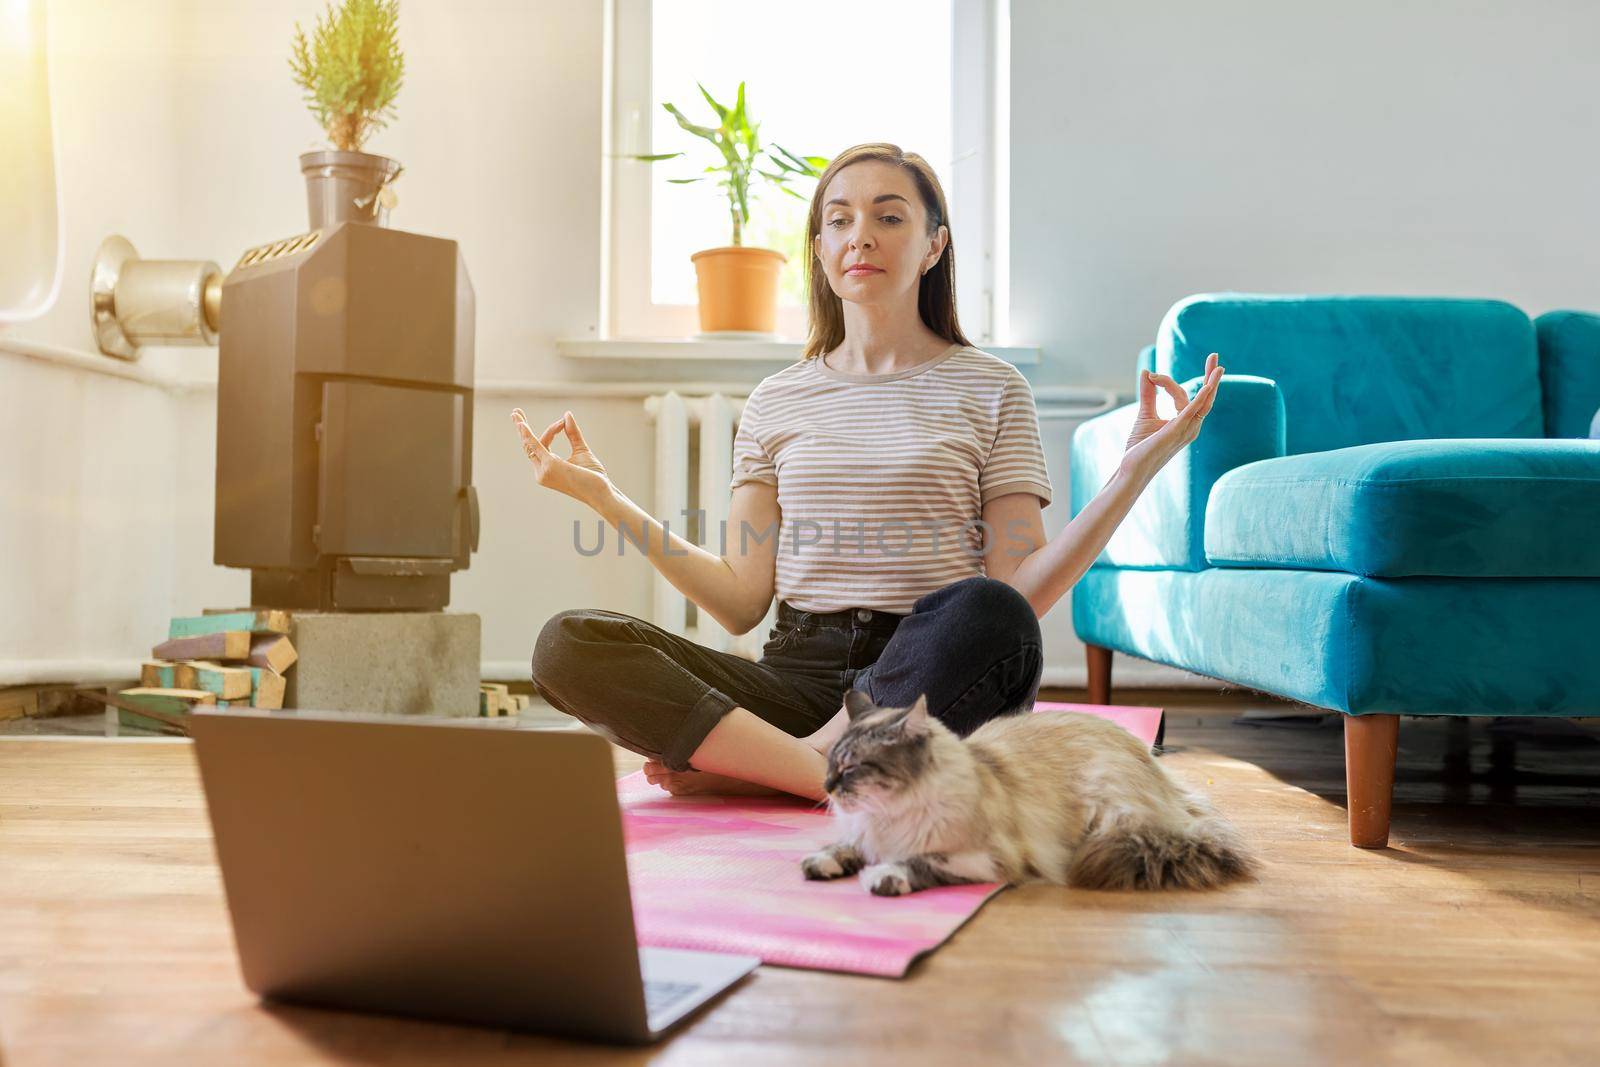 Lifestyle leisure meditation. Middle aged woman sitting at home on floor with laptop in lotus position, pet cat on exercise mat with owner